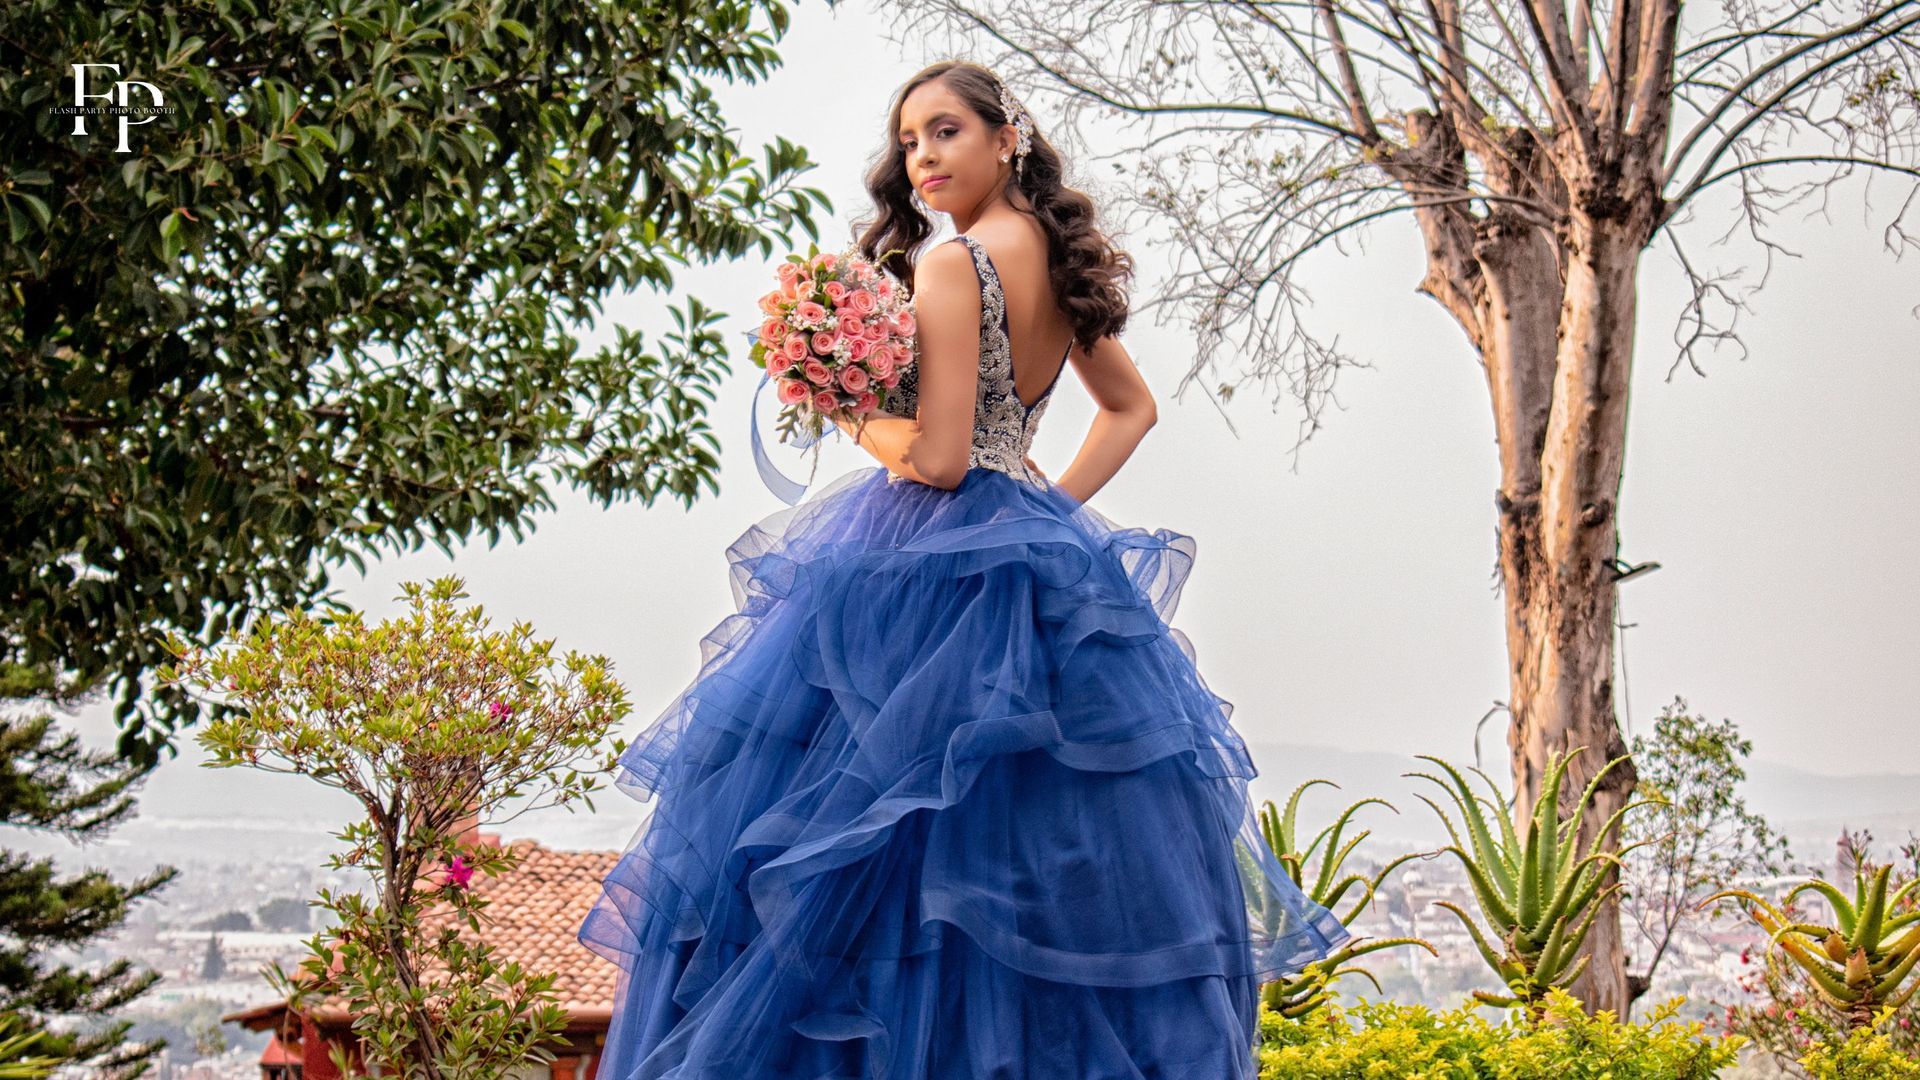 Waco quinceañera holds a stunning bouquet on her special day.